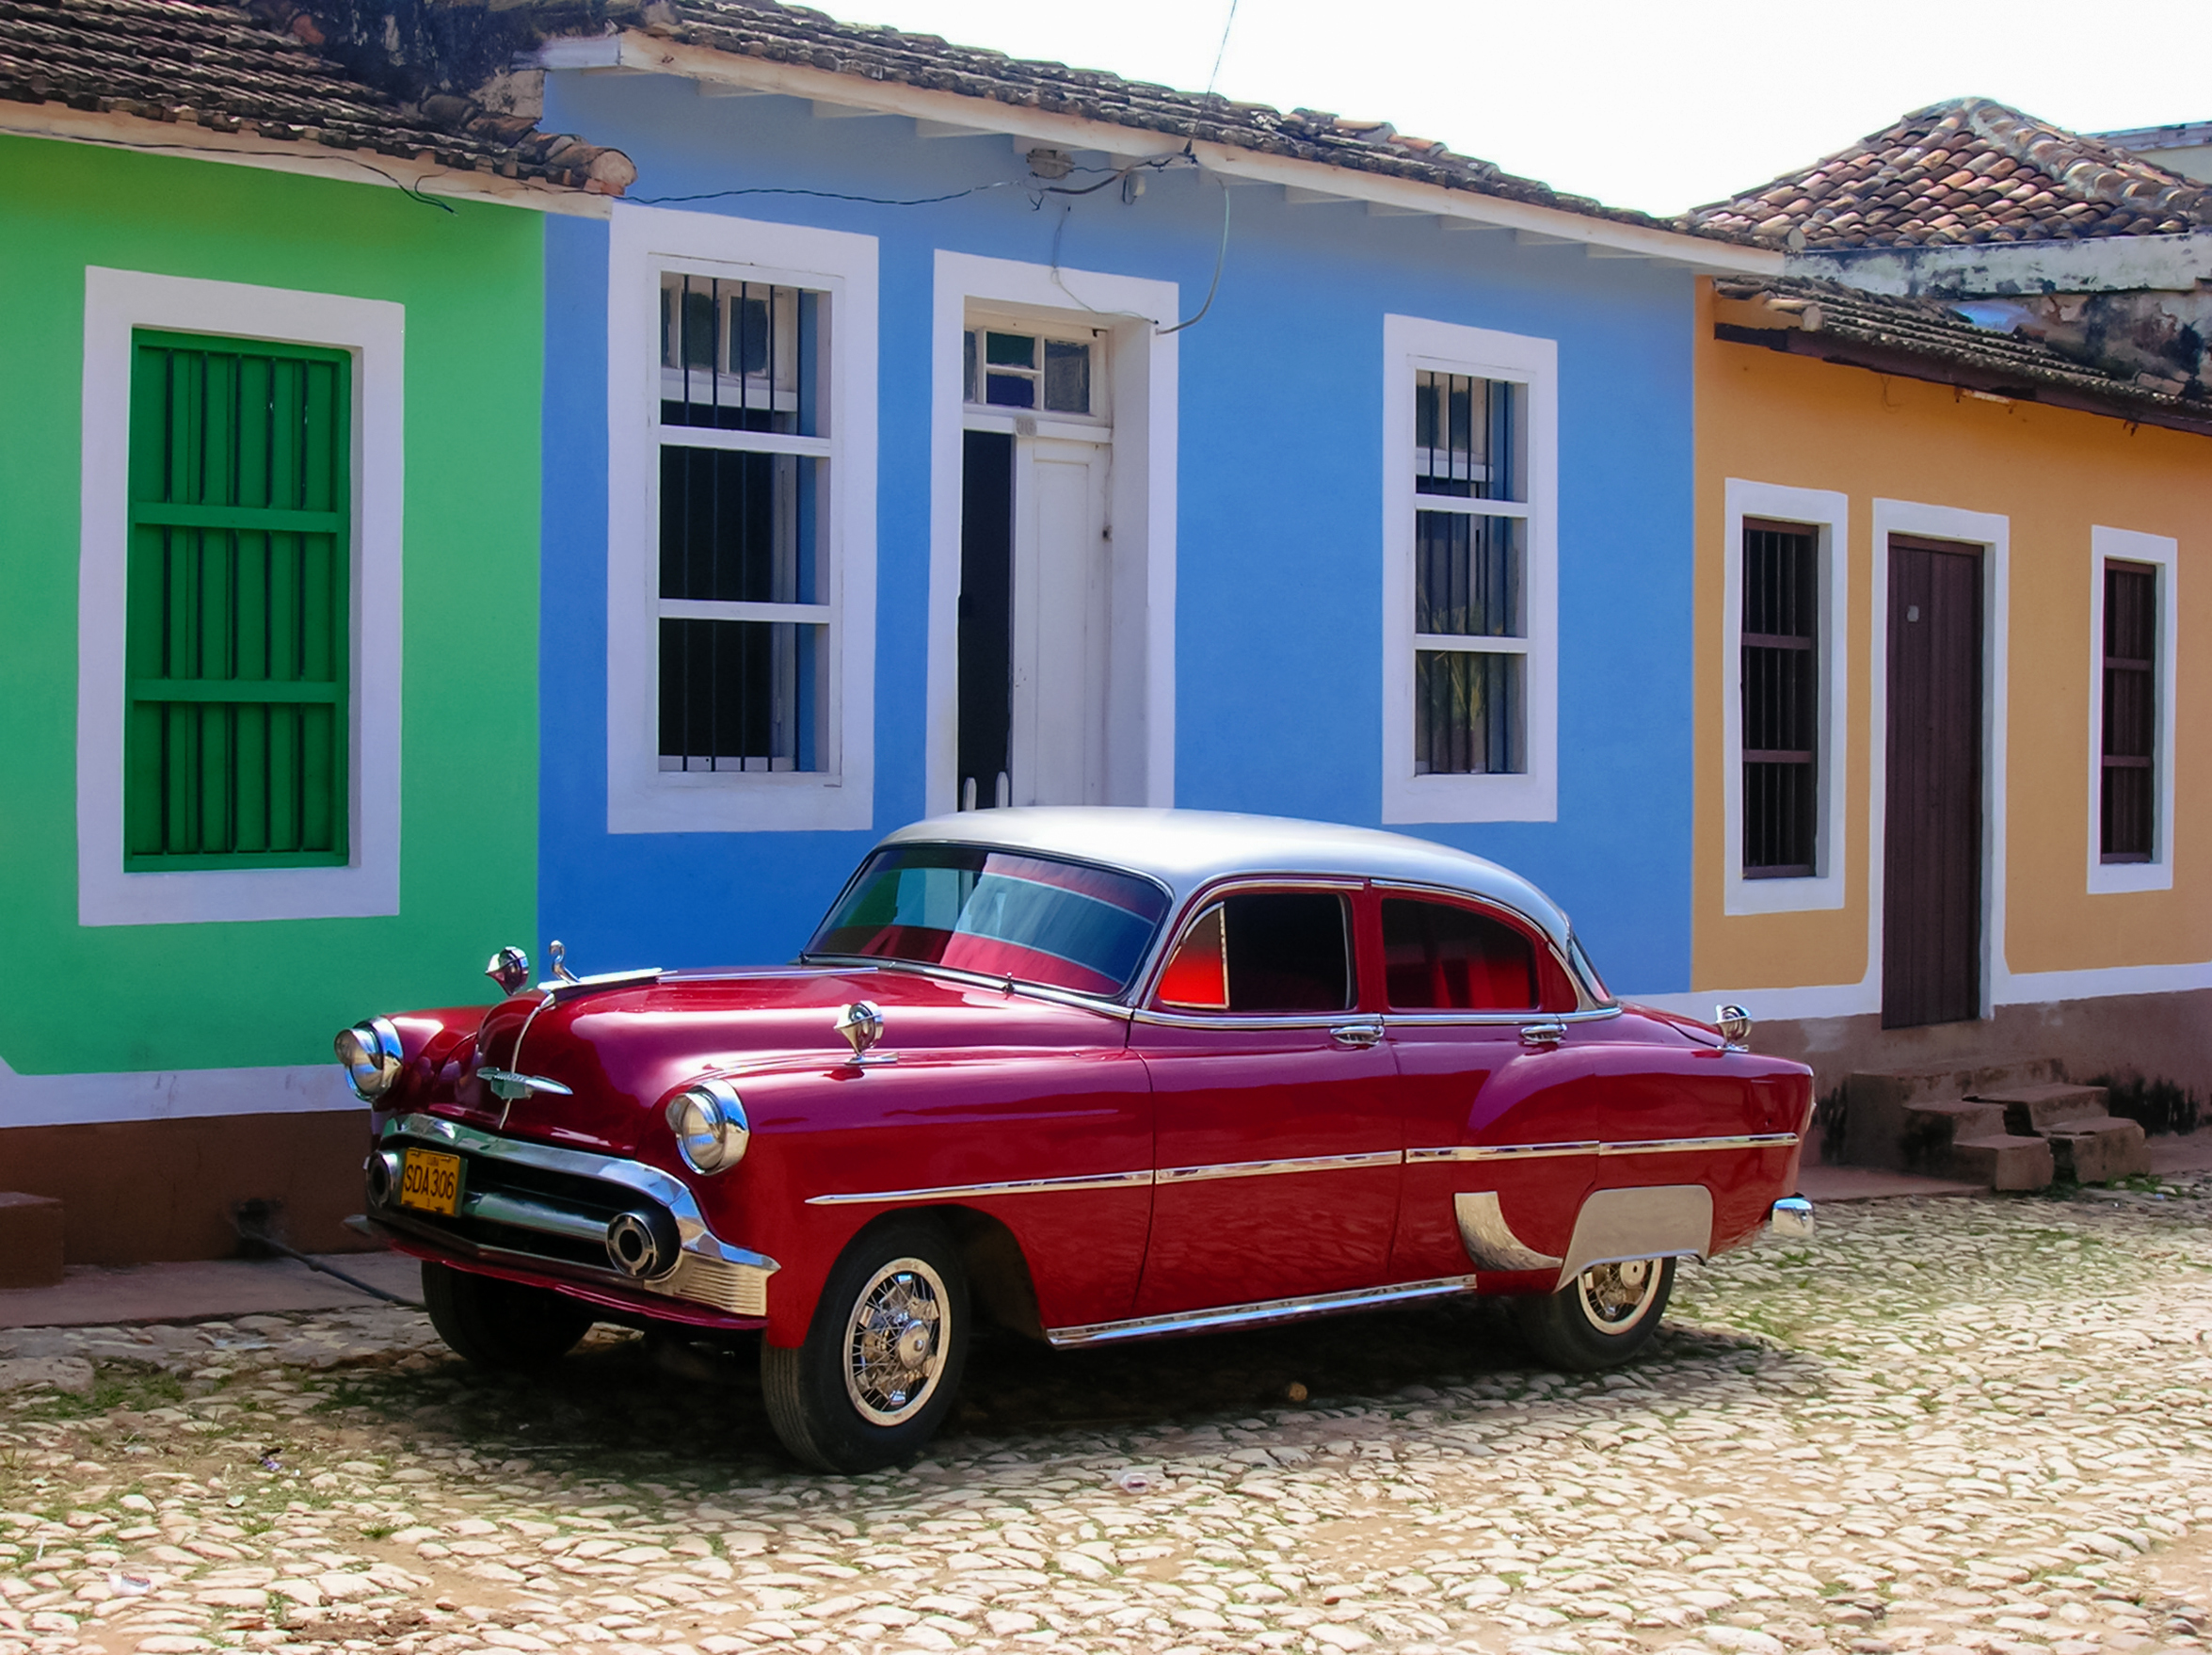 a red car parked in front of a colorful building